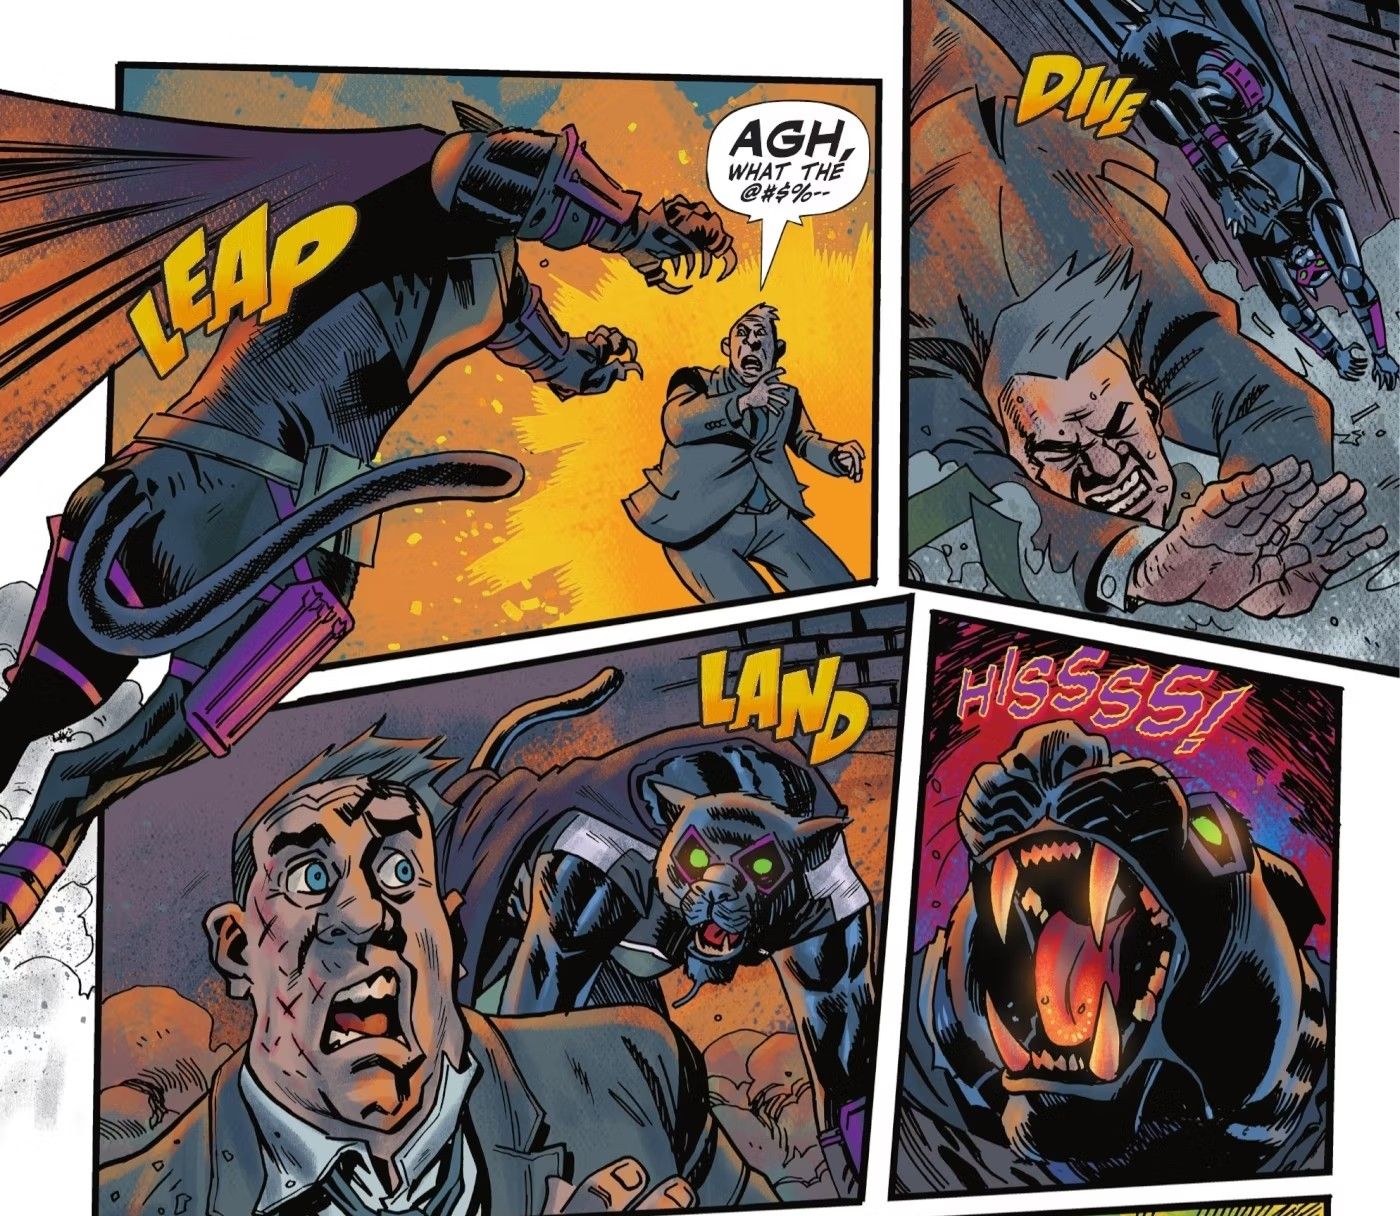 Comic book panels: a were-panther in a superhero costume attacks a man in a suit.